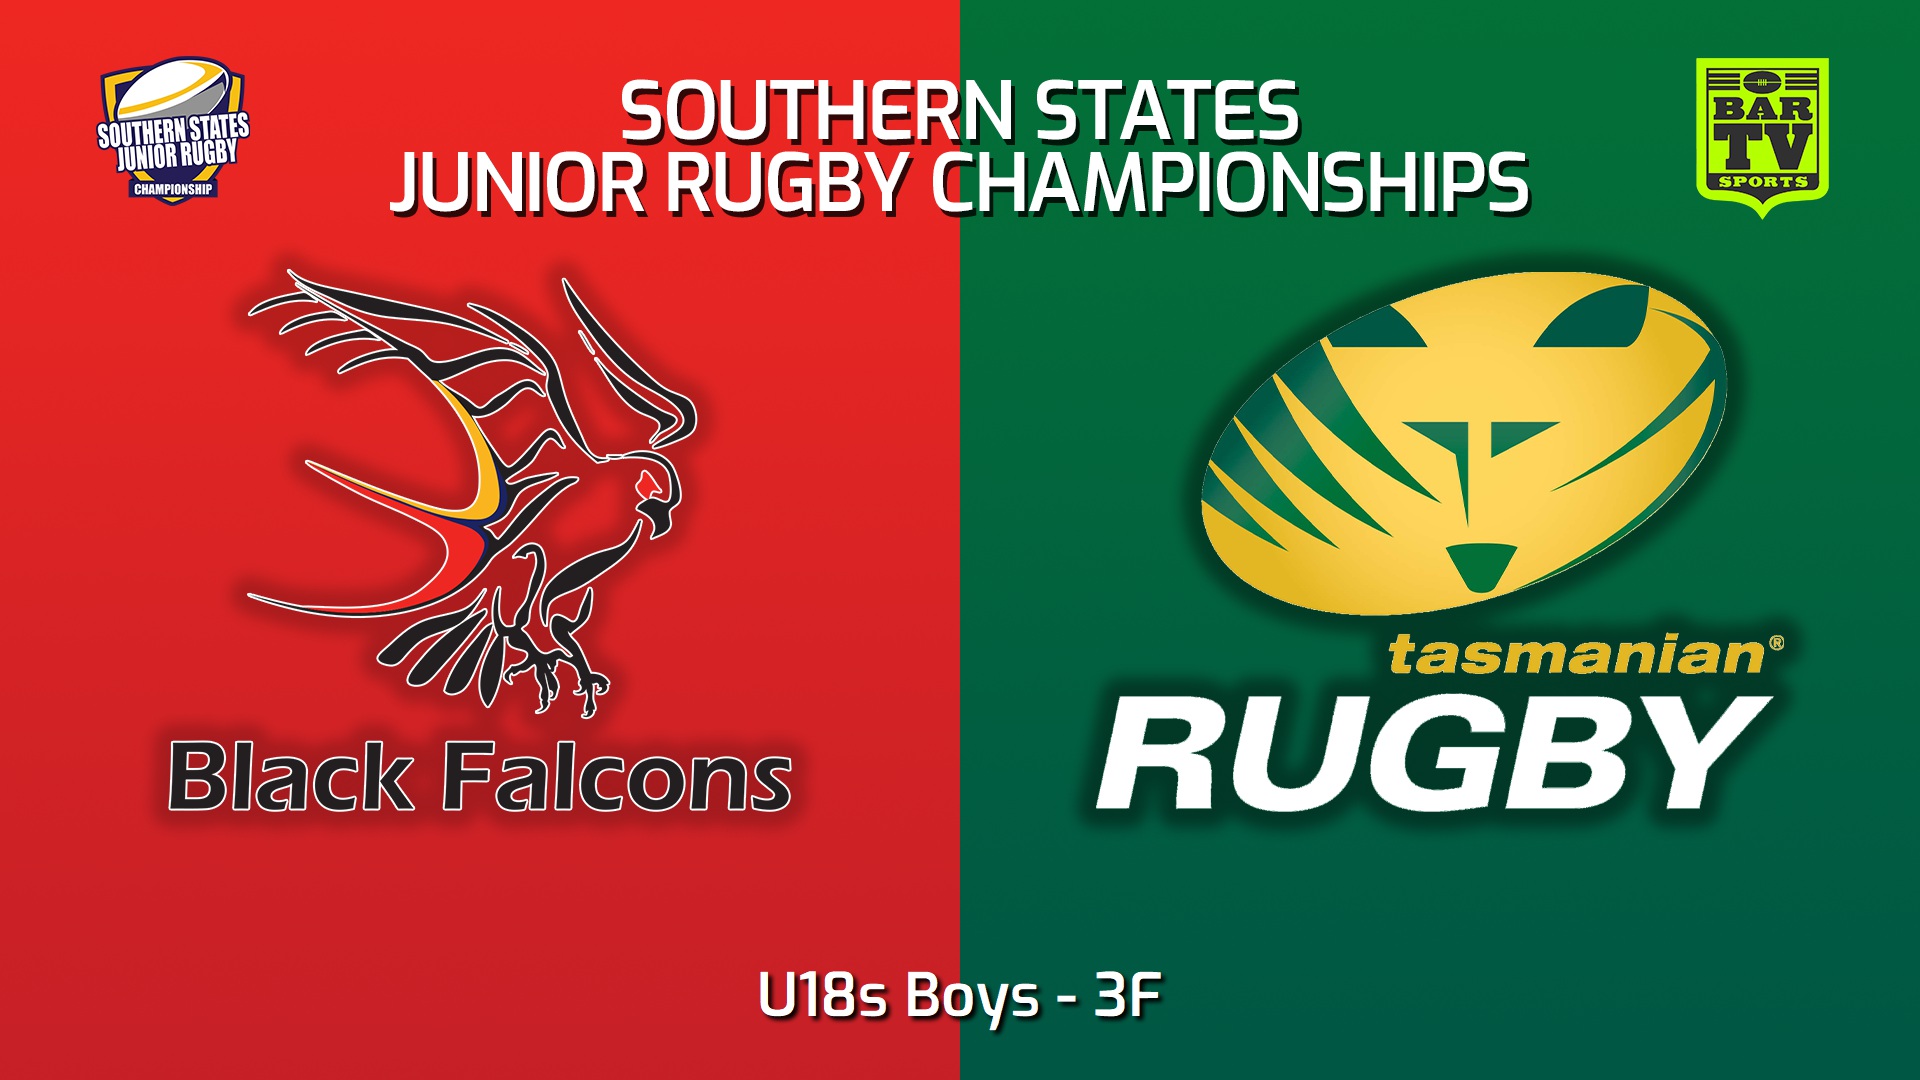 Southern States Junior Rugby Championships 3F - U18s Boys